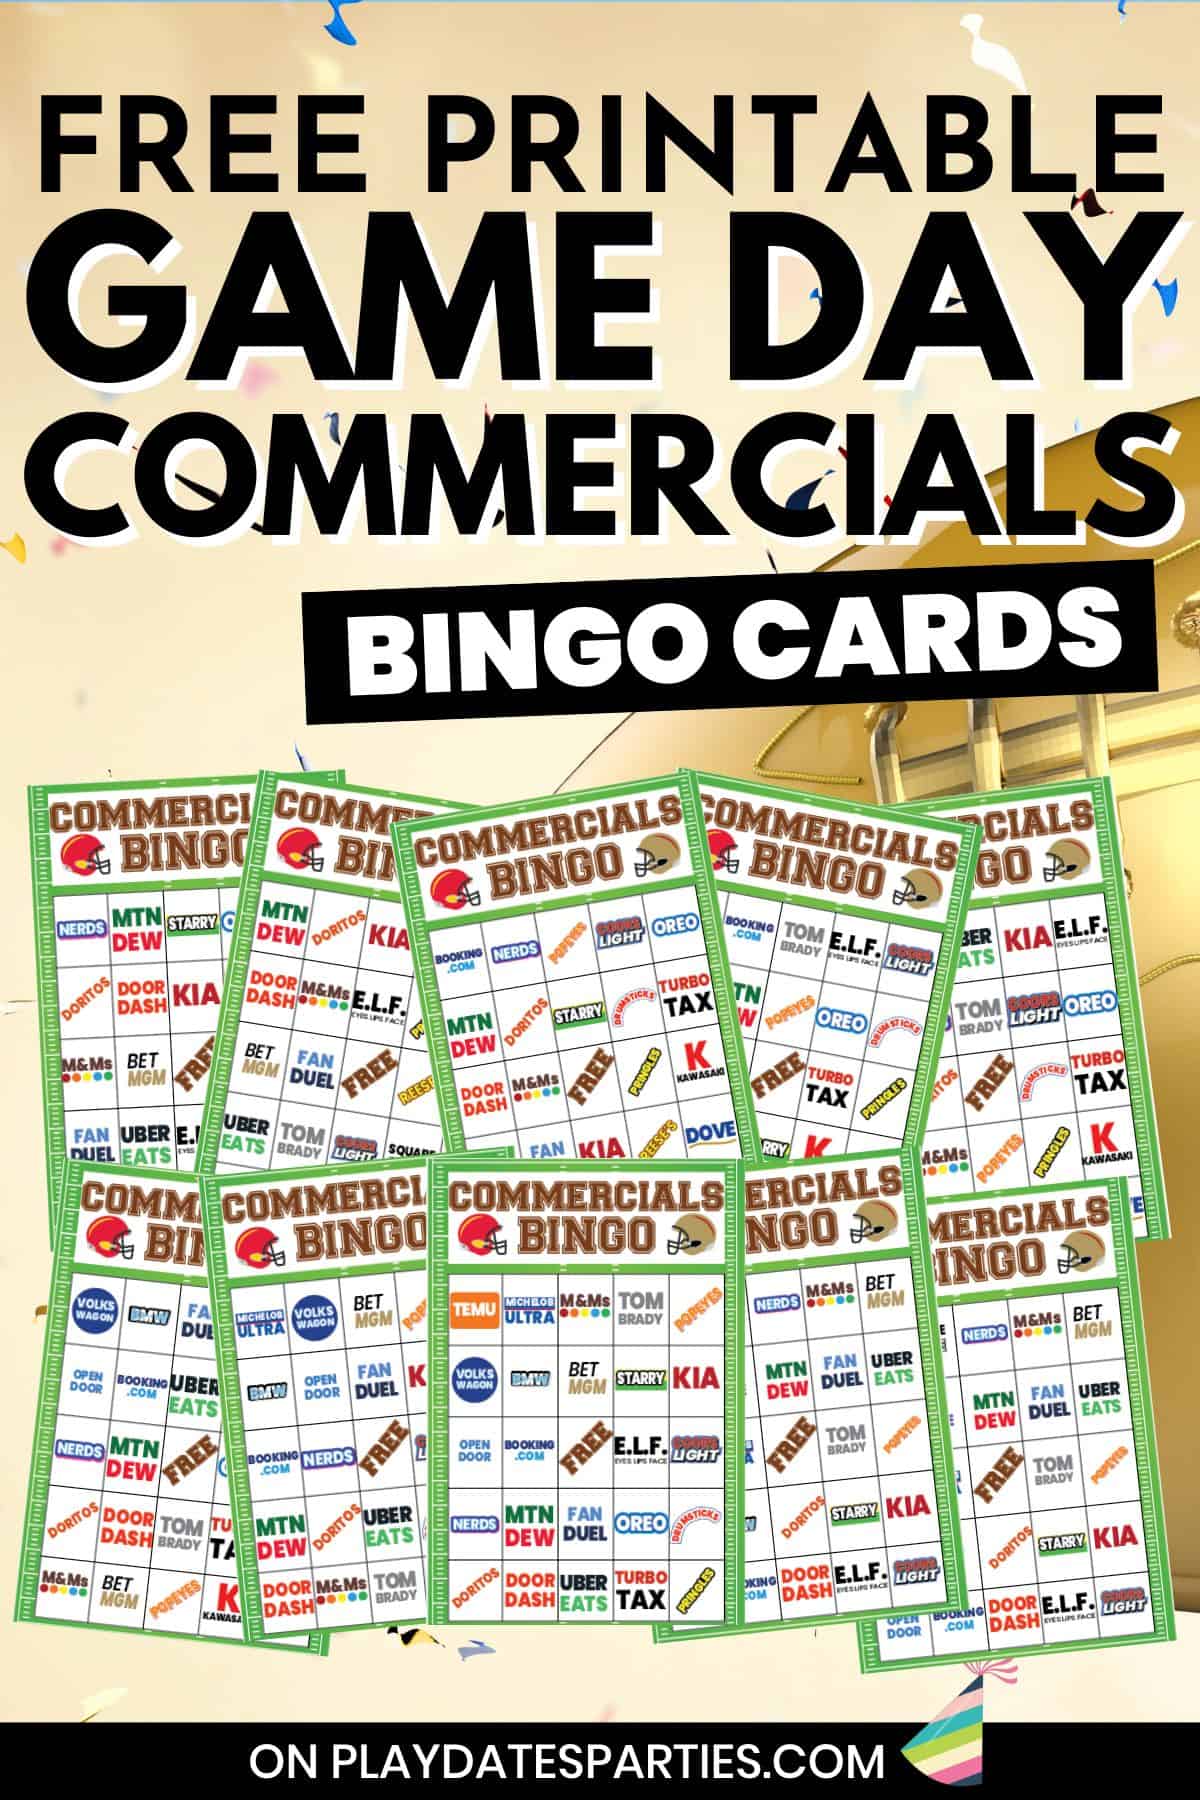 Free printable game day commercials bingo cards.